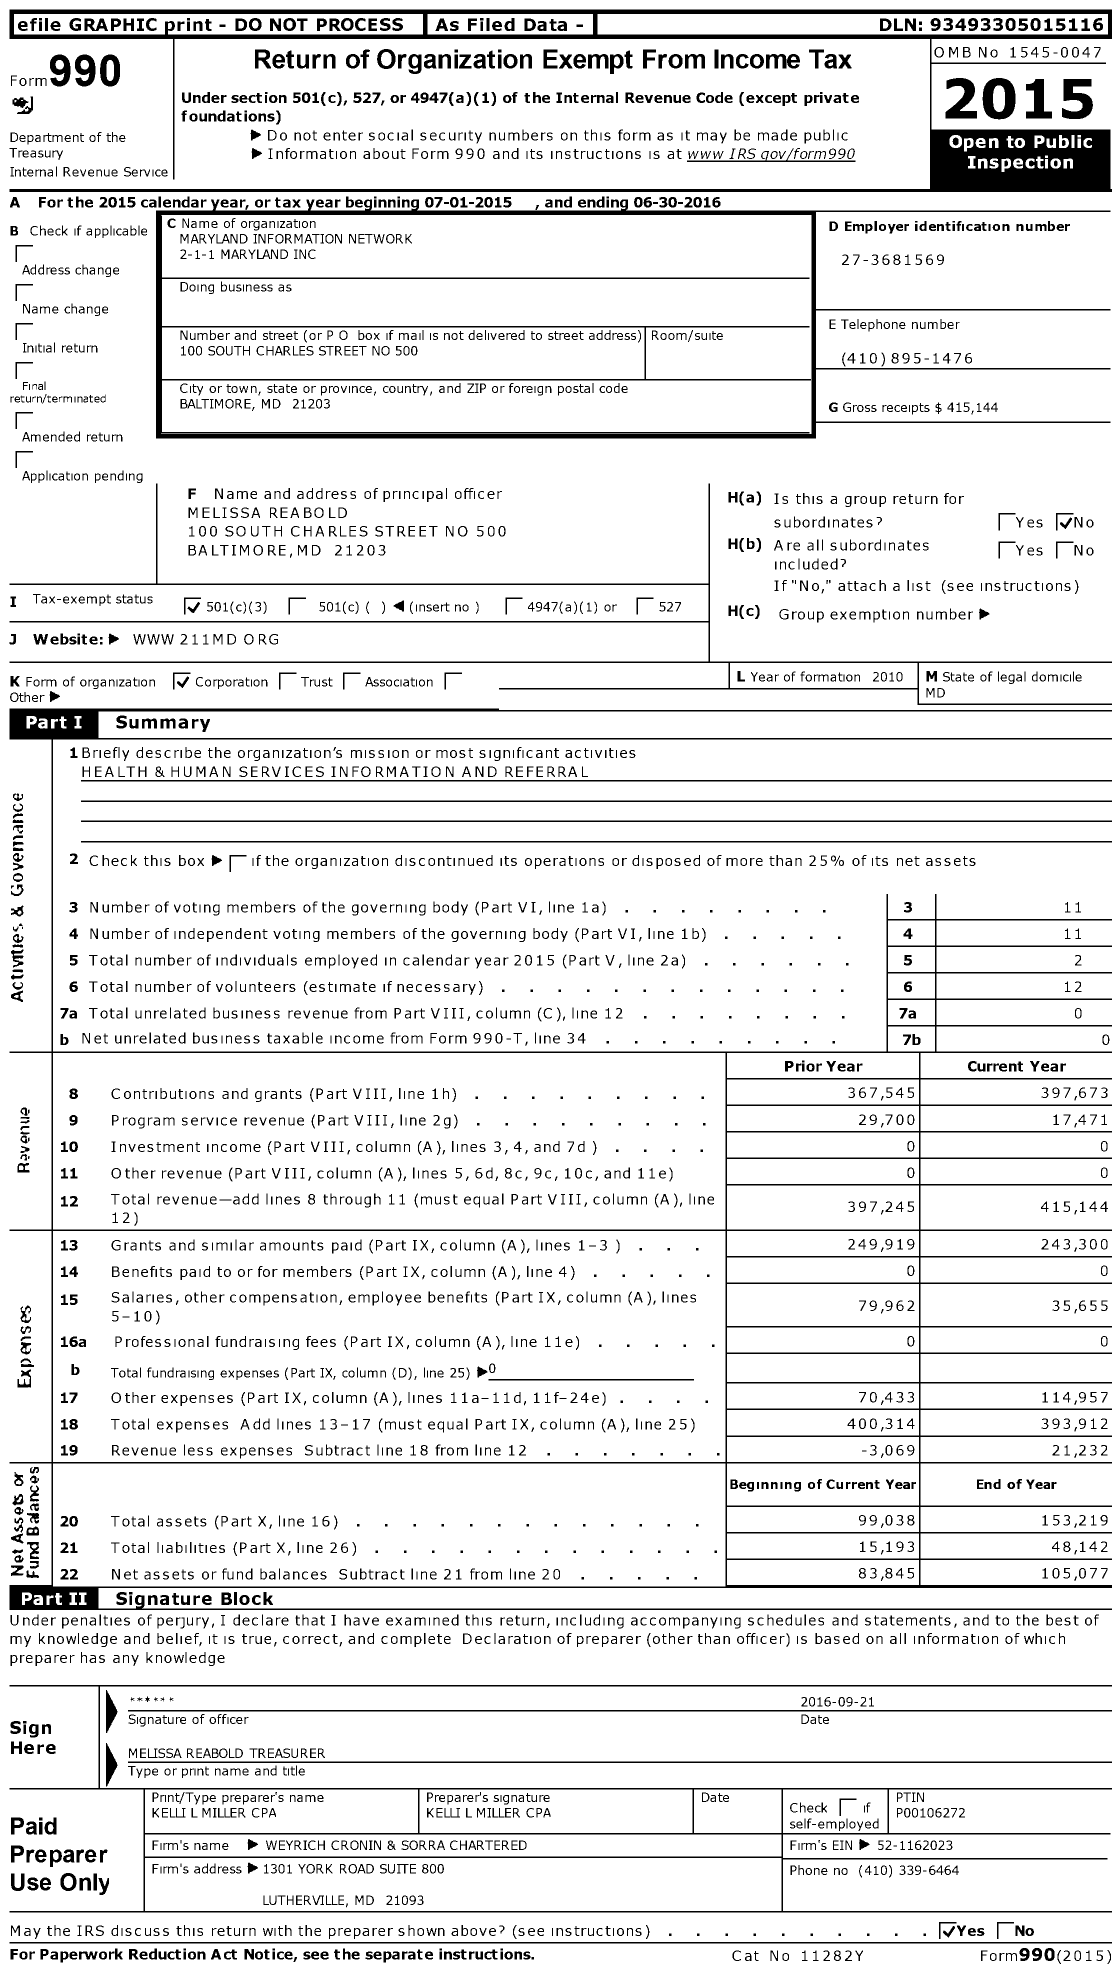 Image of first page of 2015 Form 990 for Maryland Information Network 2-1-1 Maryland